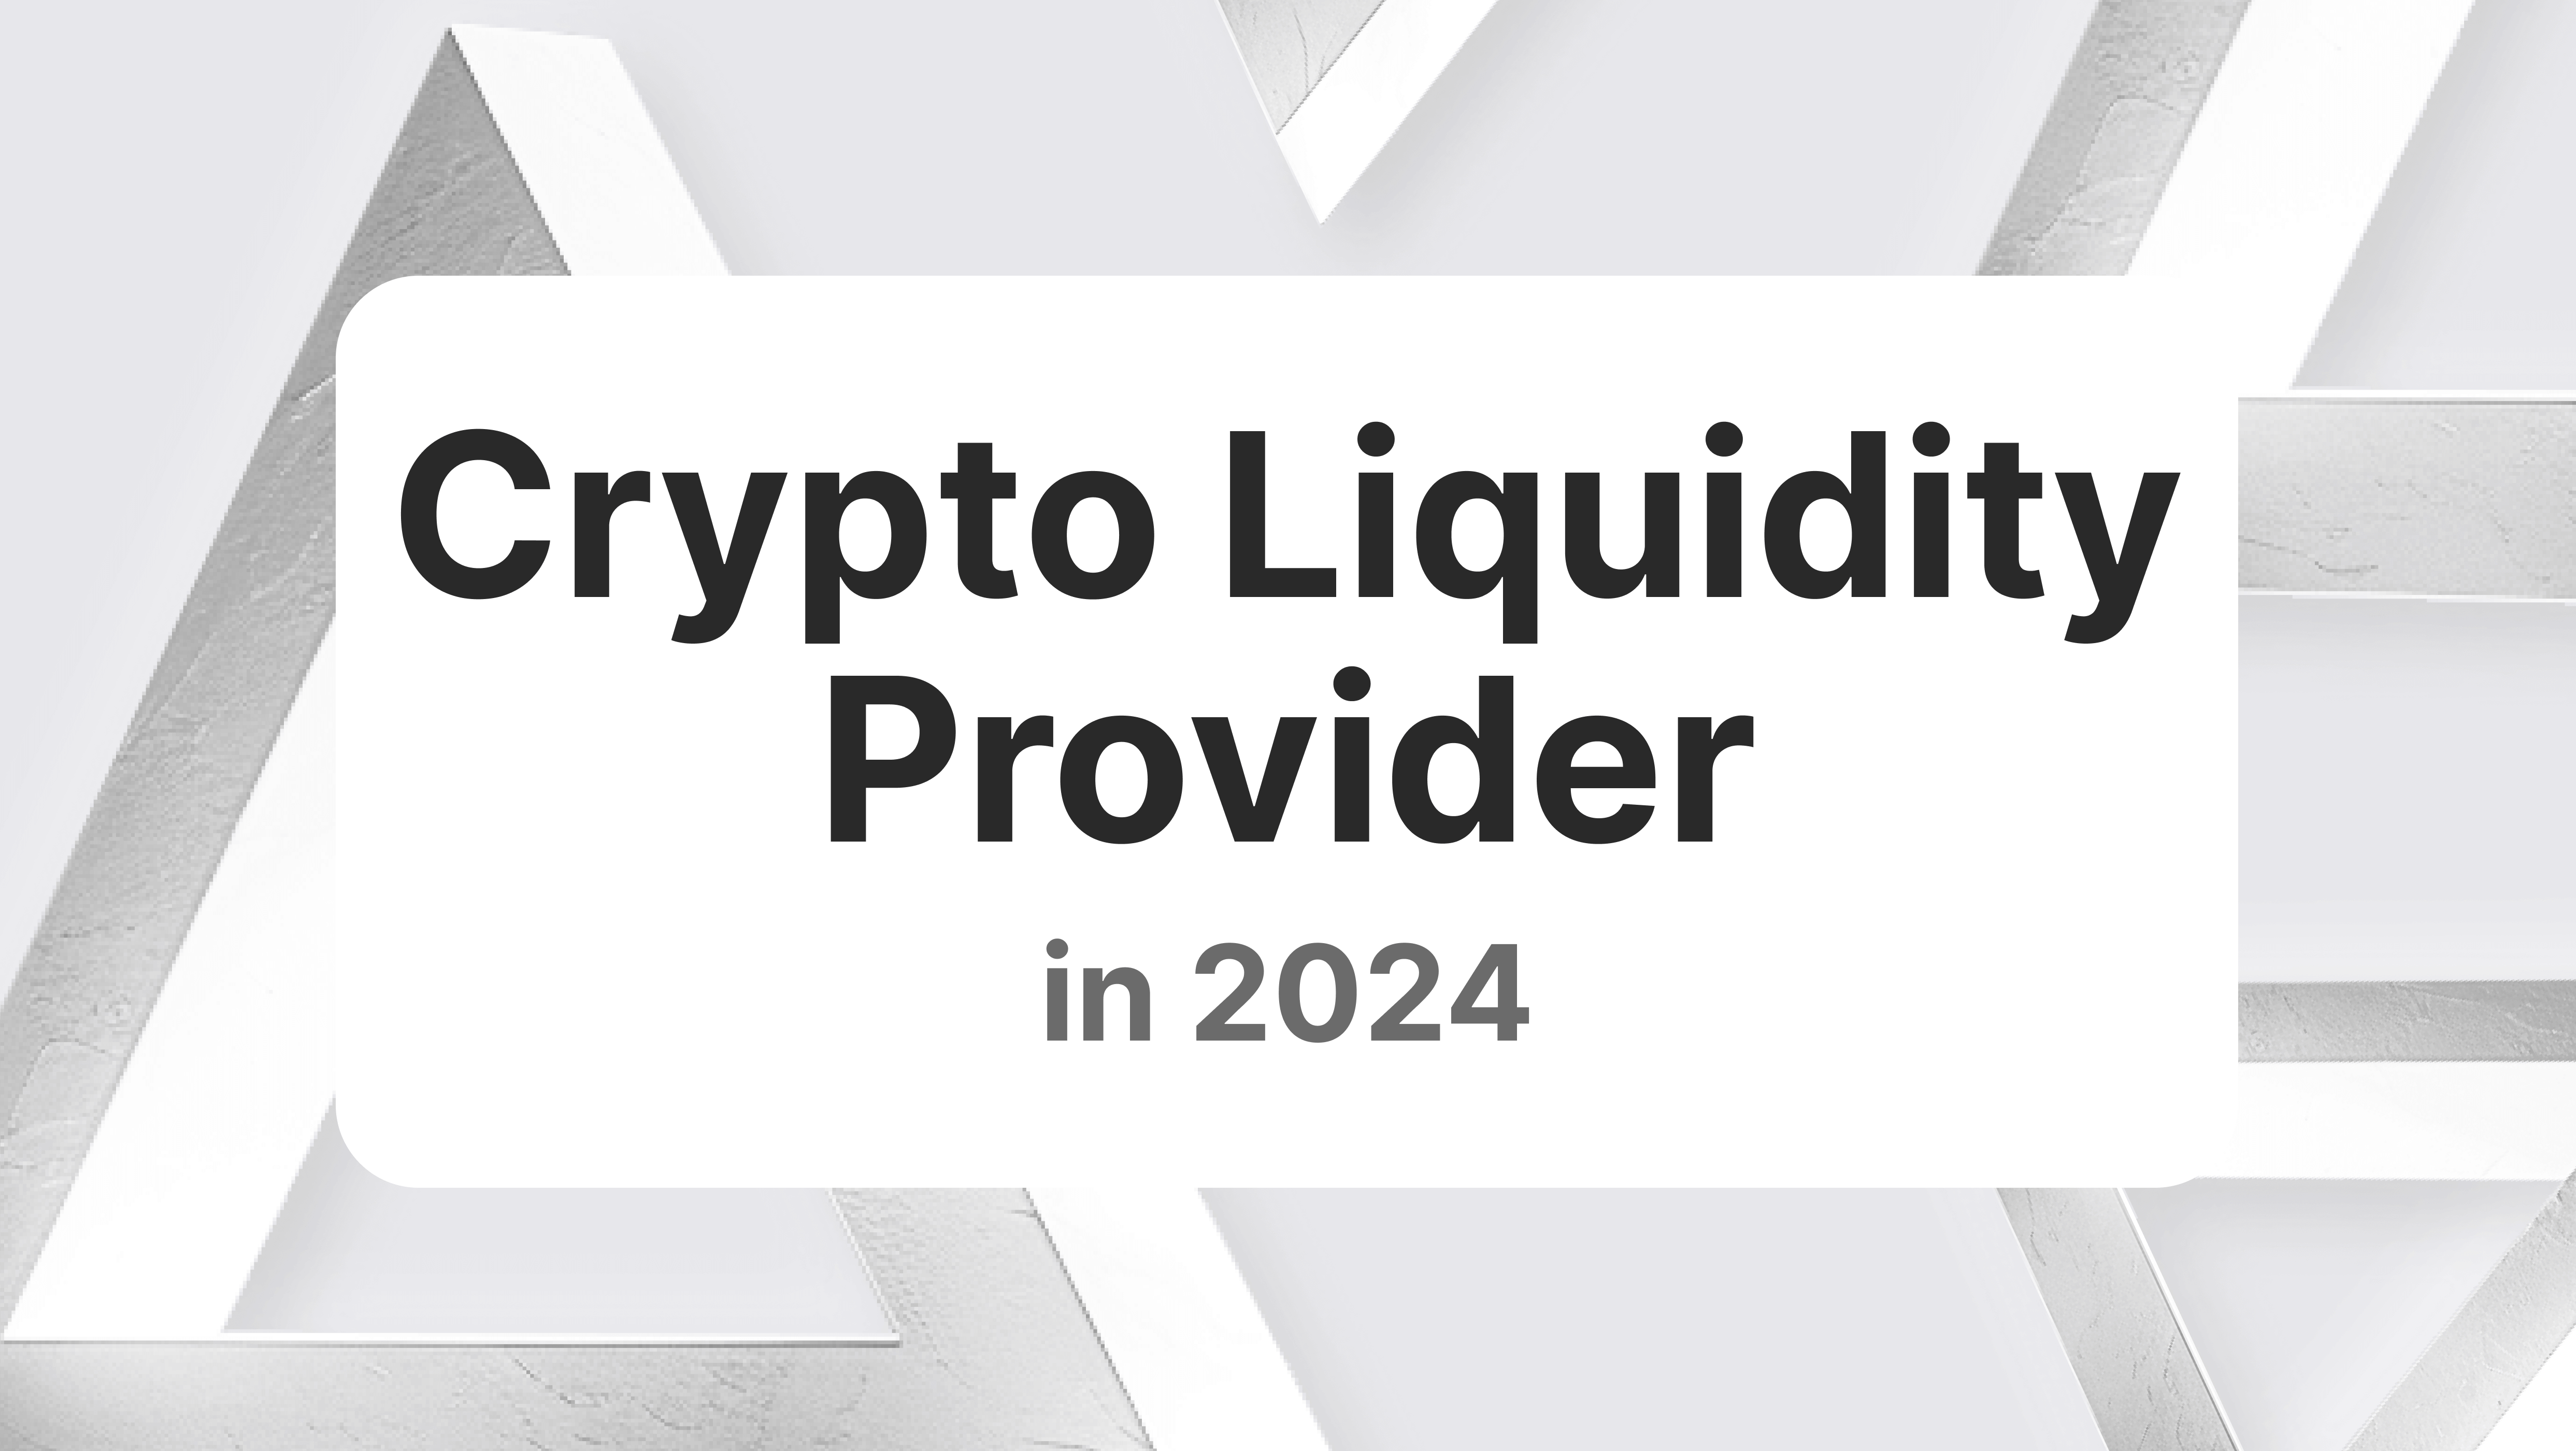 How to Find a Crypto Liquidity Provider in 2024